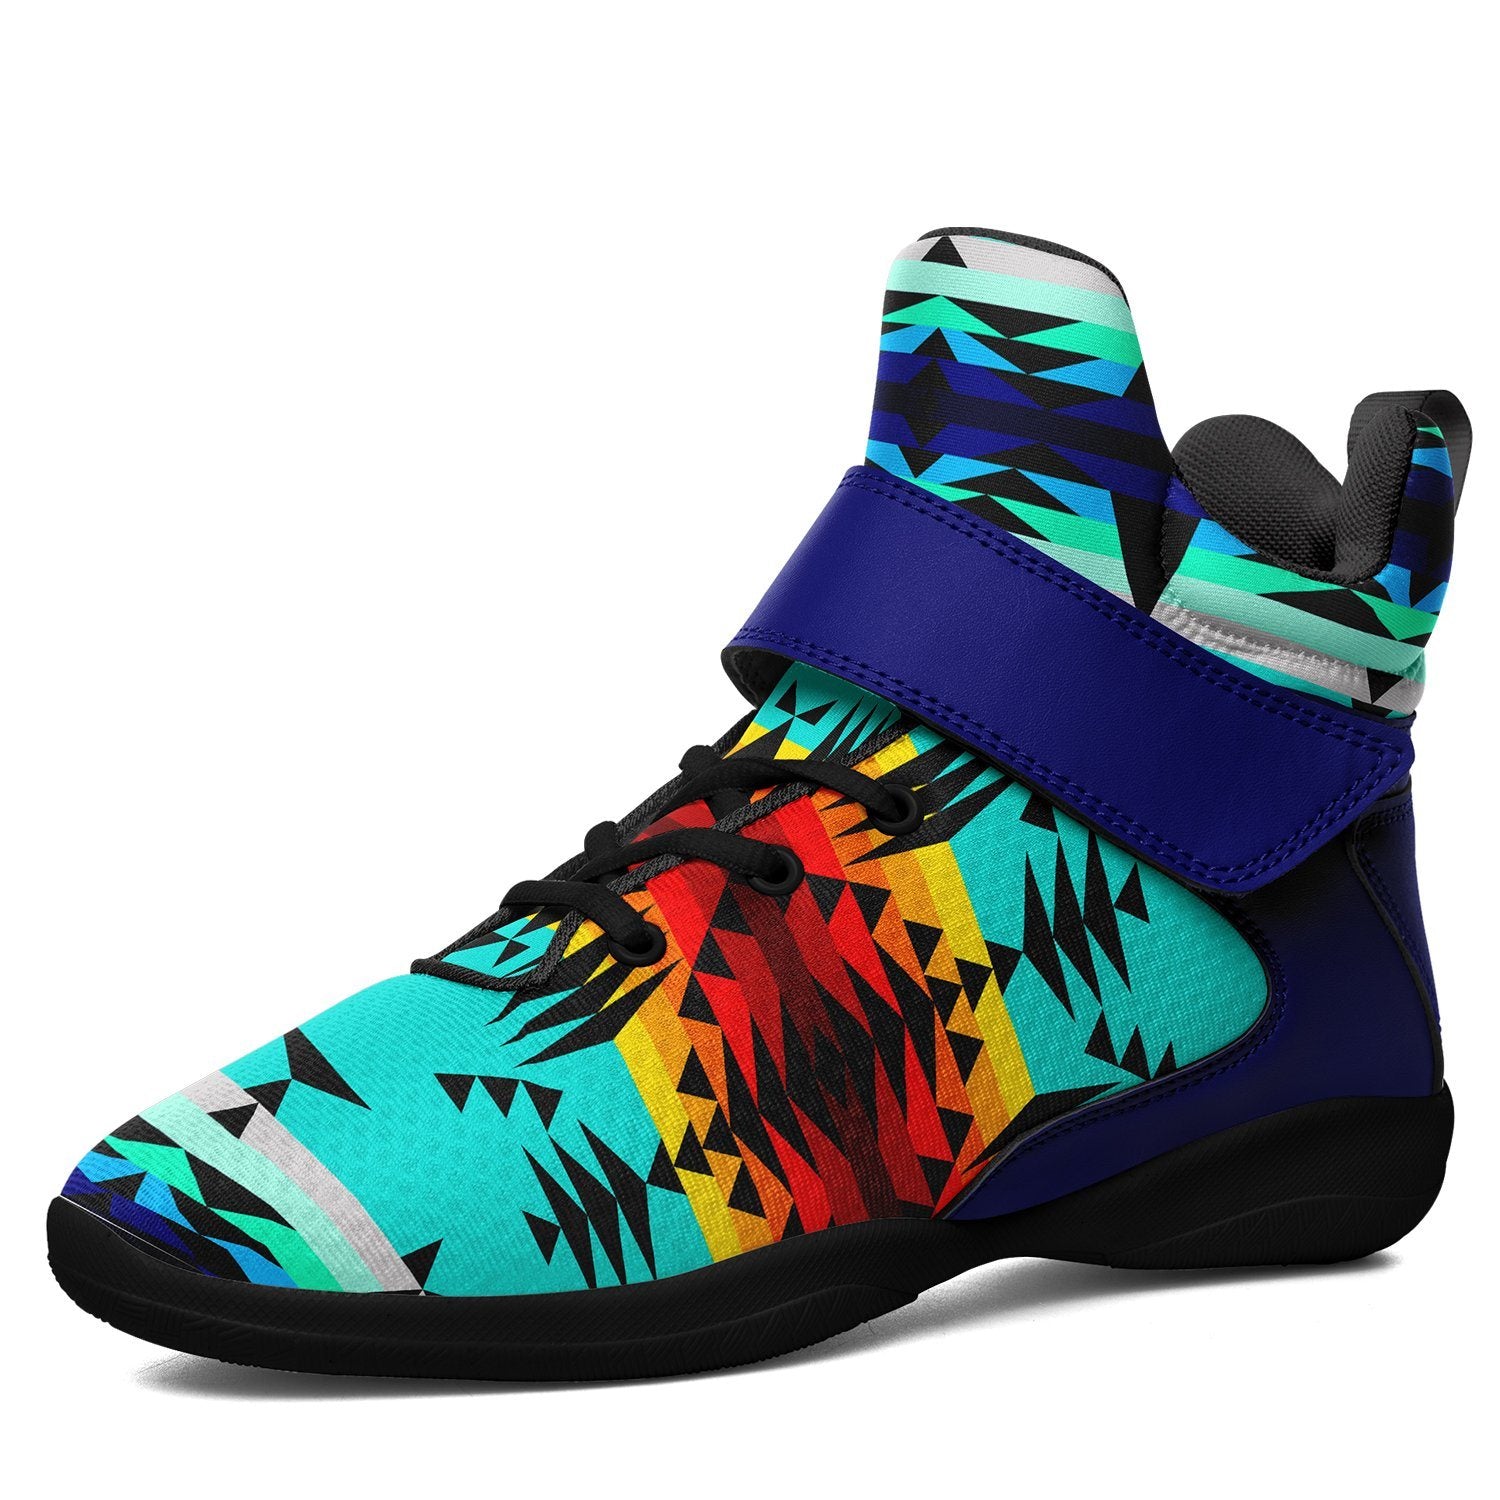 Between the Mountains Ipottaa Basketball / Sport High Top Shoes 49 Dzine US Women 4.5 / US Youth 3.5 / EUR 35 Black Sole with Blue Strap 